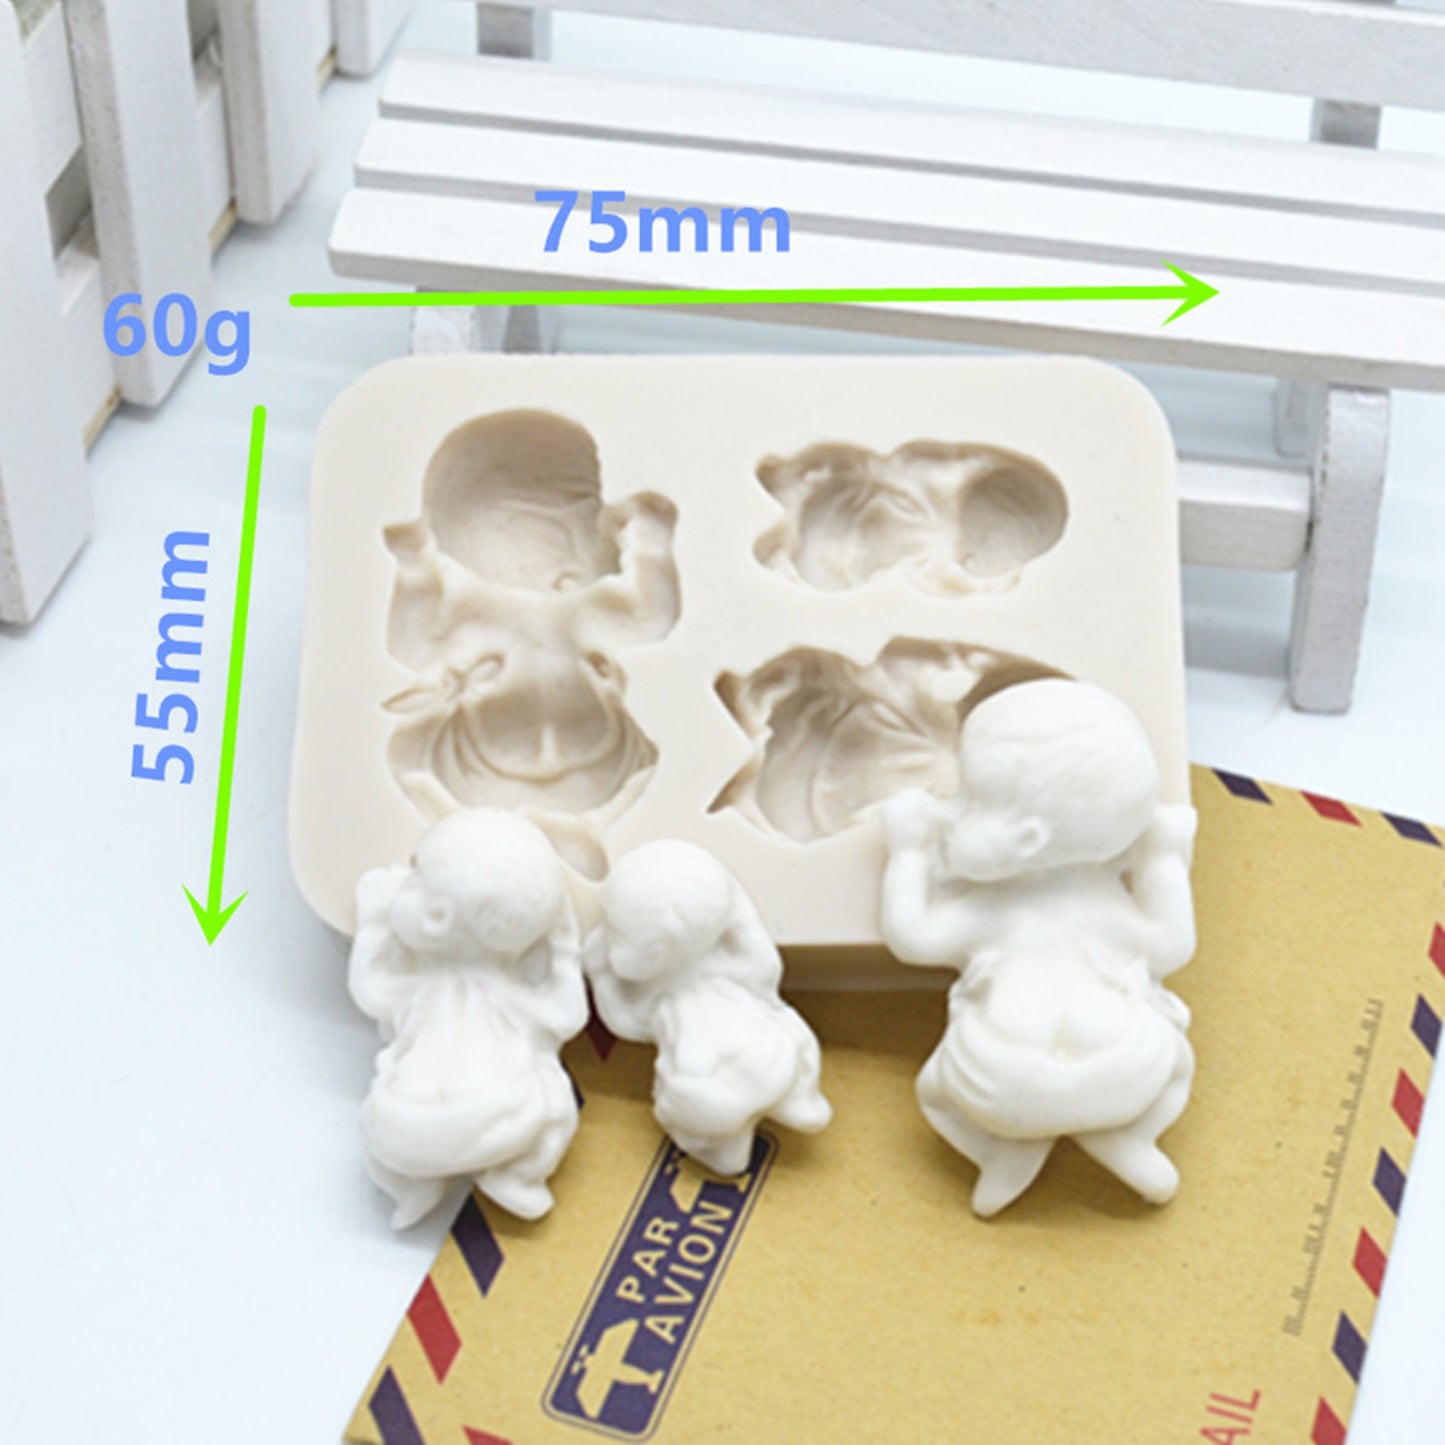 3D Baby Cake Mold Sleep Silicone Molds Chocolate Candy Molds Fondant Cake Decorating Tools DIY Soap Pastry Baking Mold M114